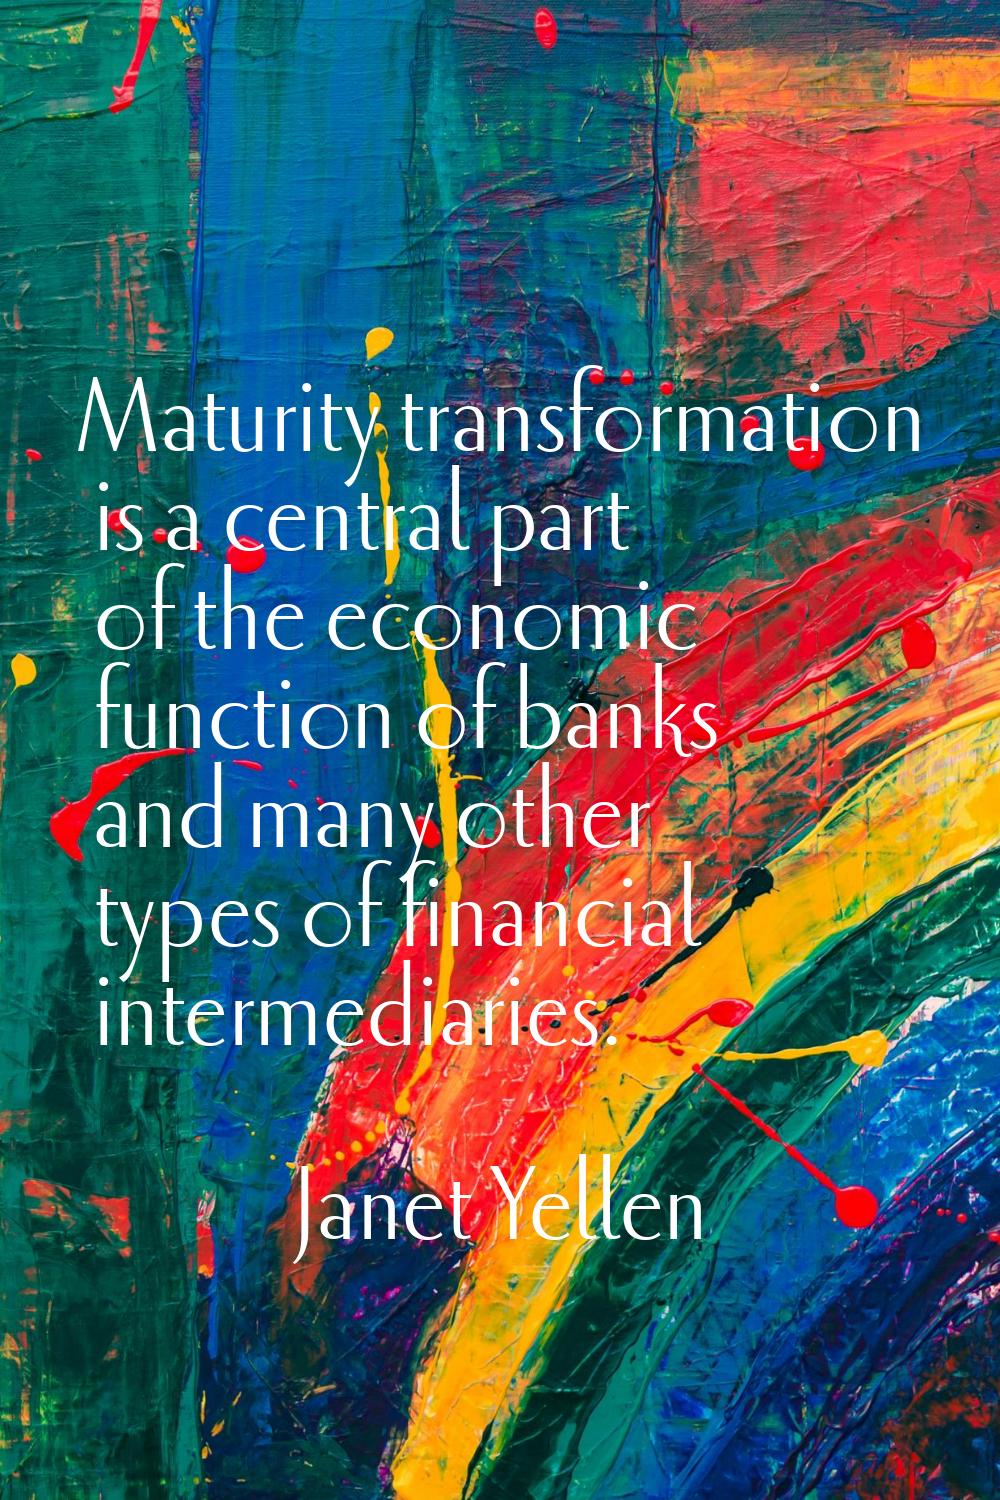 Maturity transformation is a central part of the economic function of banks and many other types of